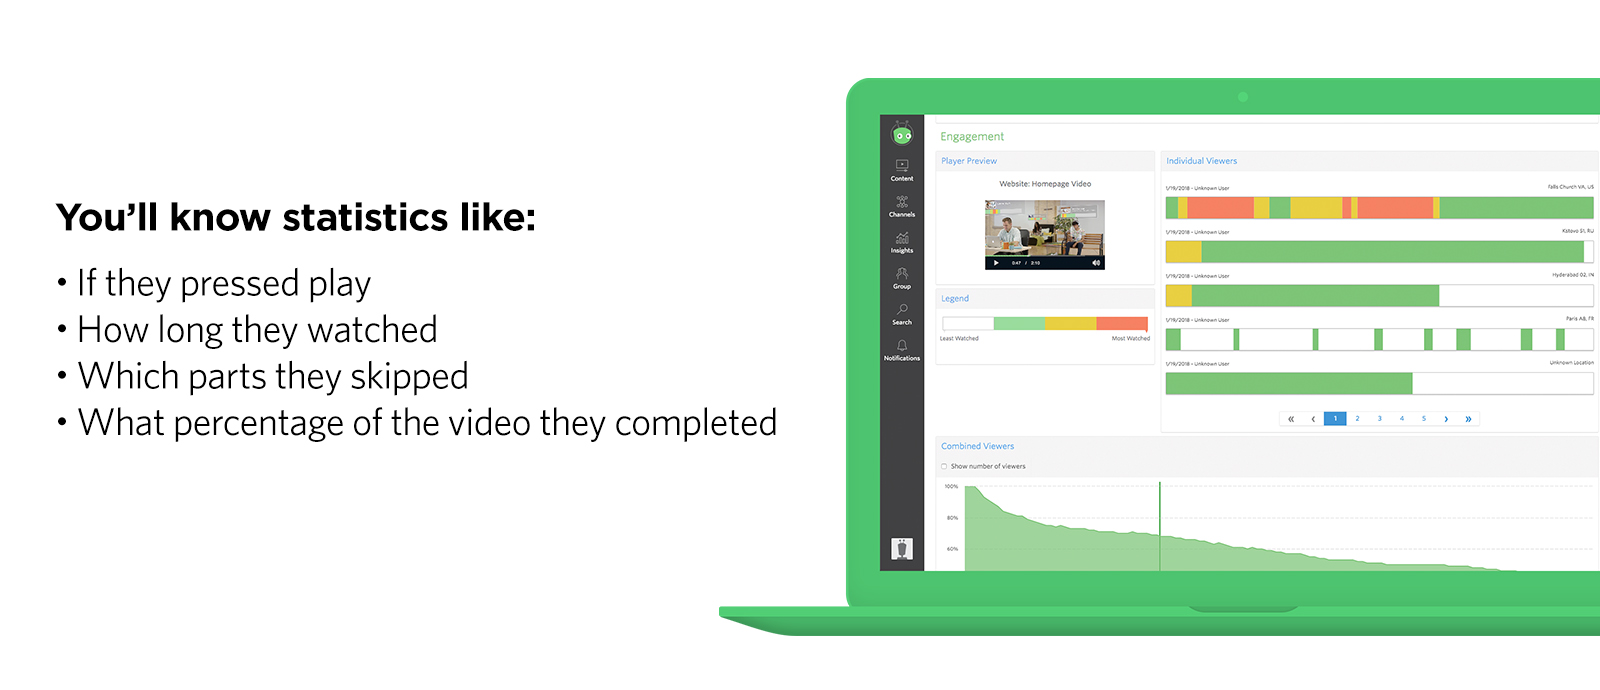 Video analytics let you capture statistics like if they pressed play, how long they watched, which parts they skipped, and what percentage of the video they completed